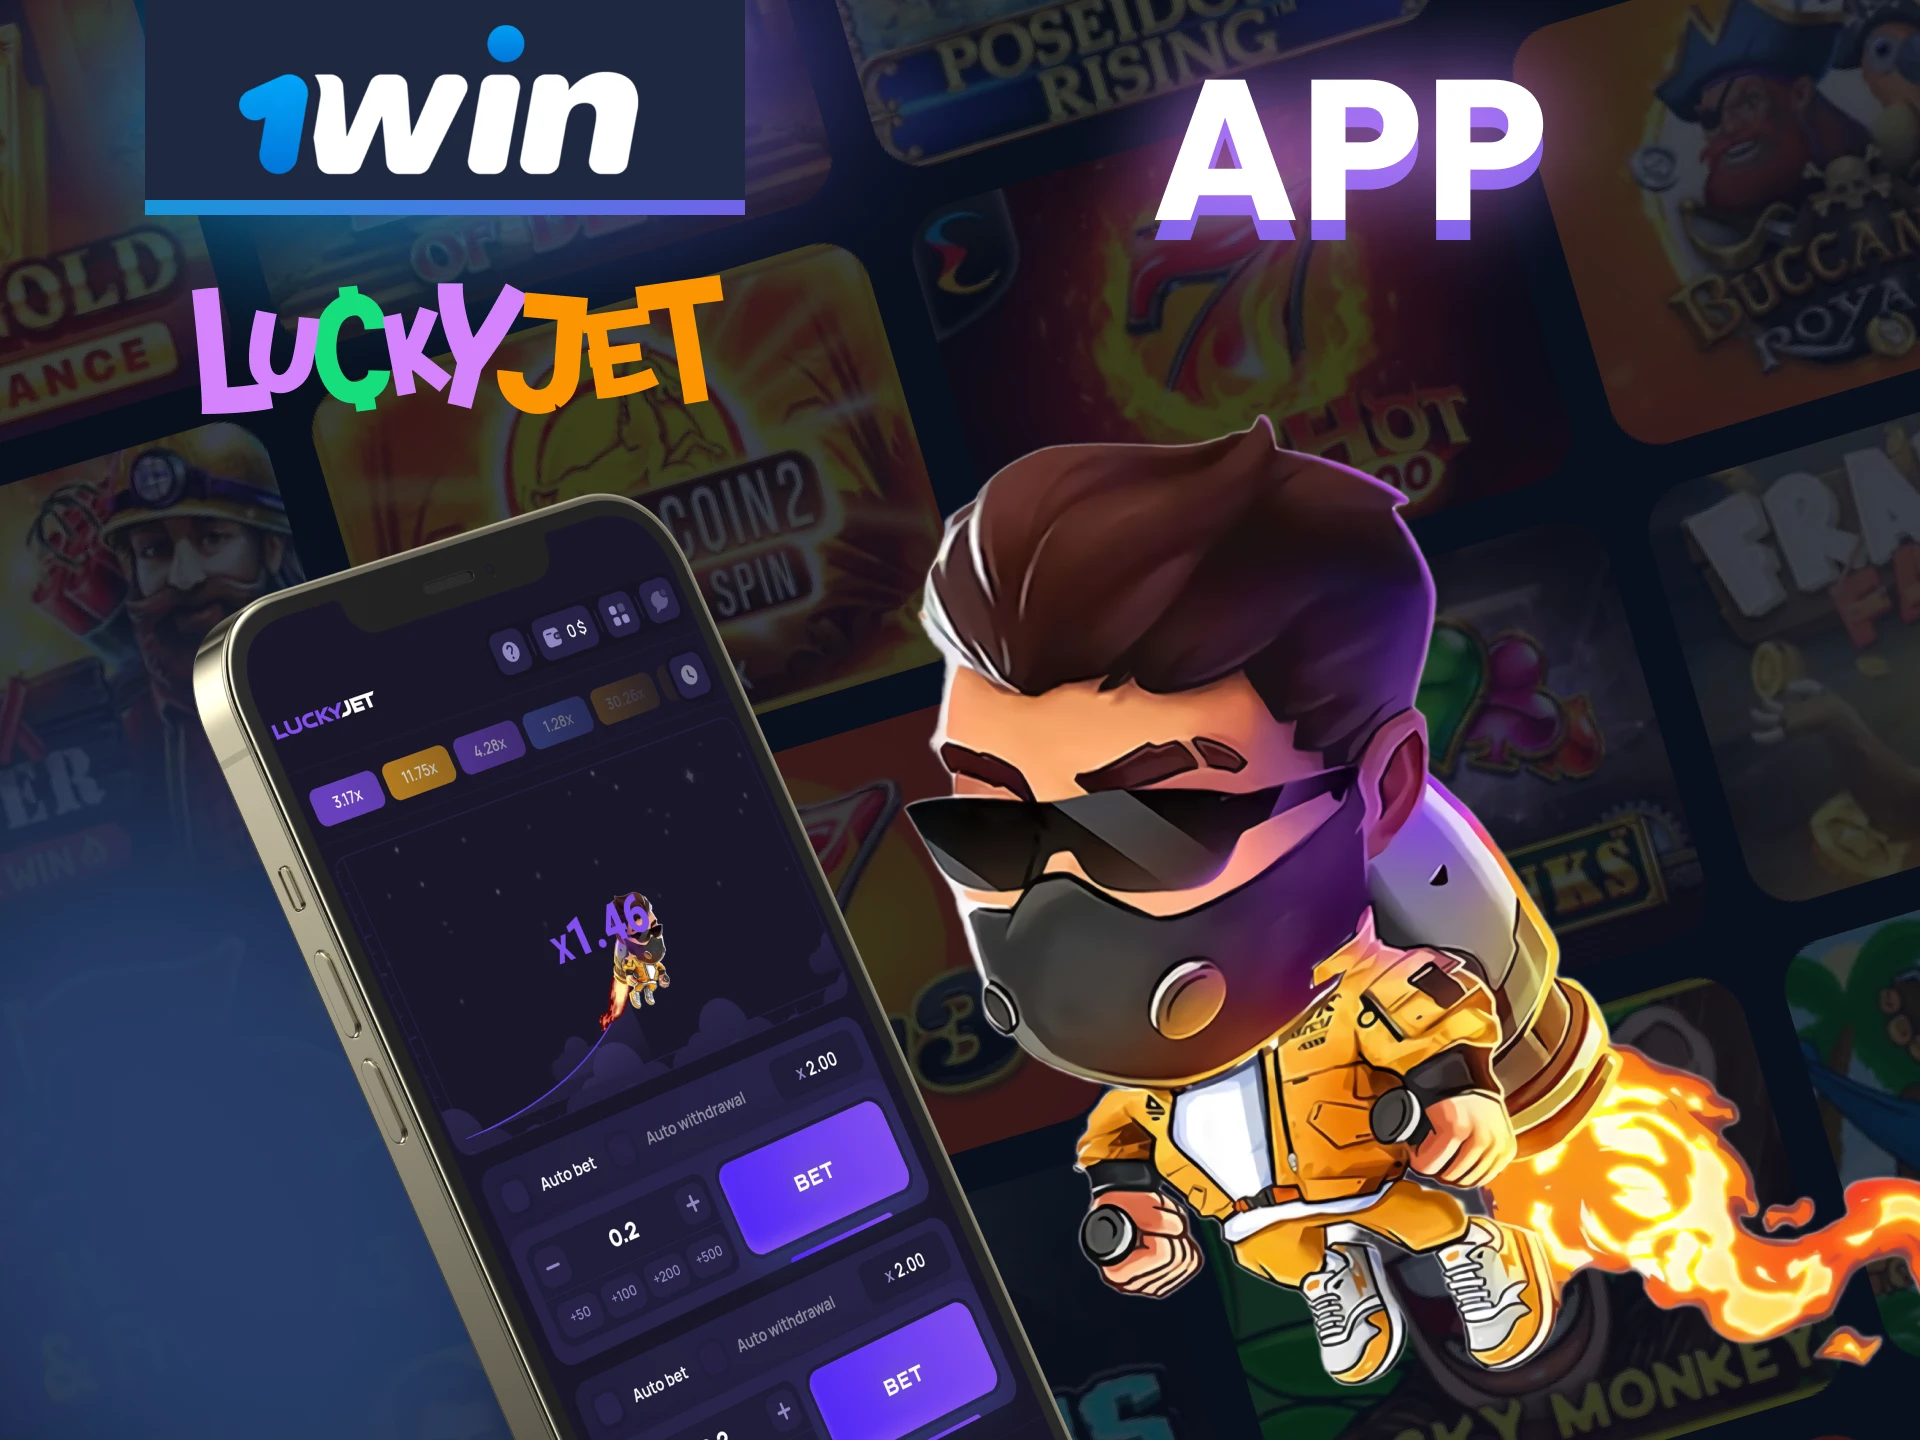 Use the 1win app on your smartphone to play Lucky Jet.